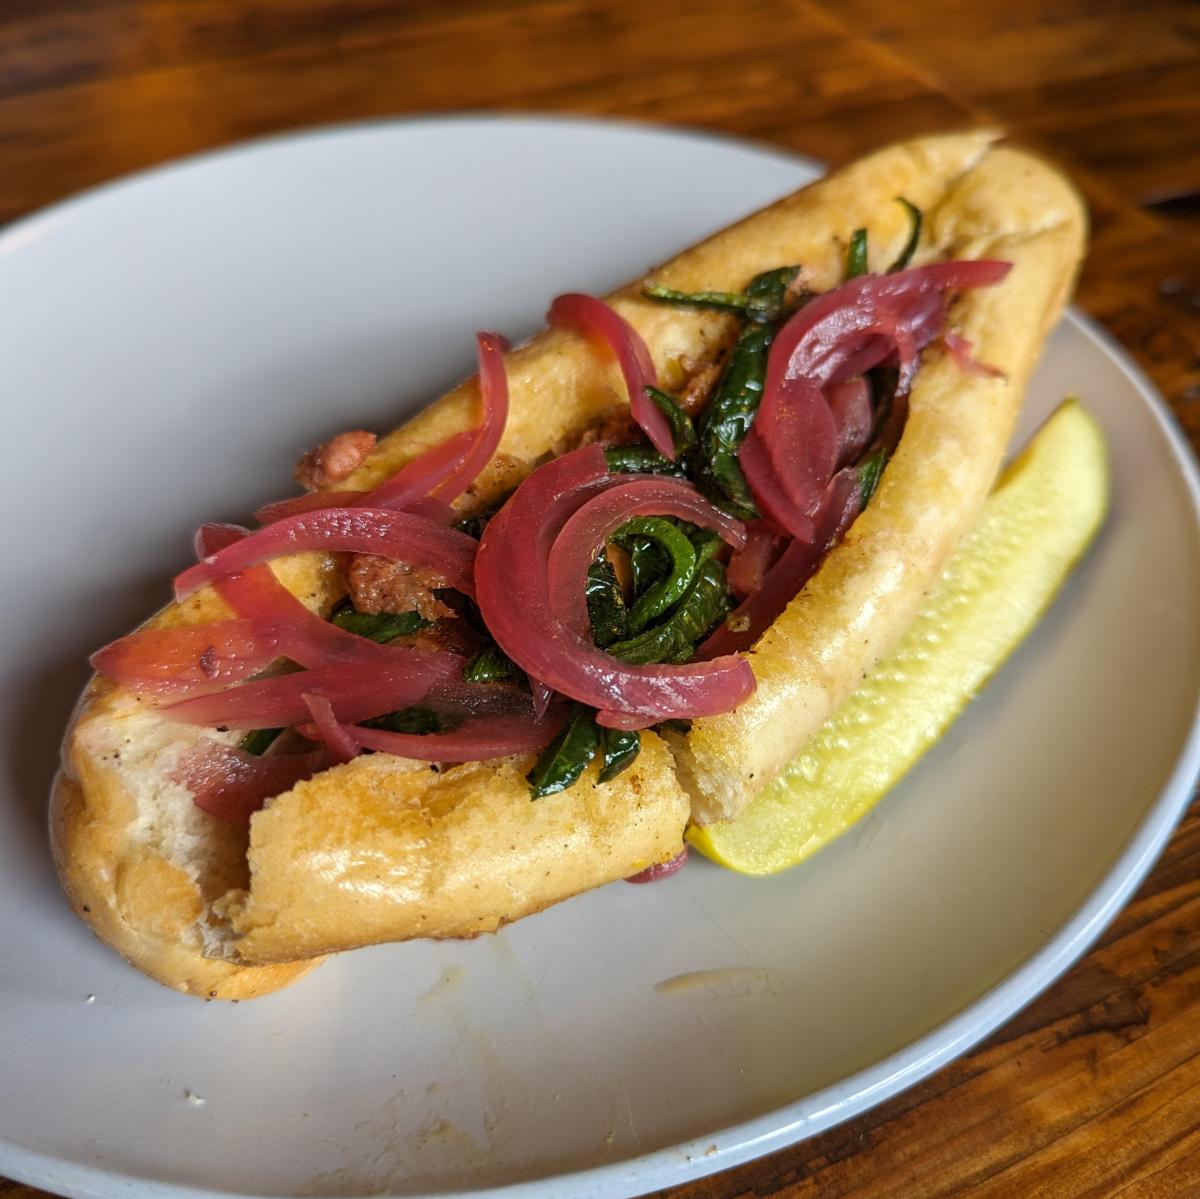 Image is of Shiners Implanted plant sausage in a toasted hot dog bun with onions and poblanos.